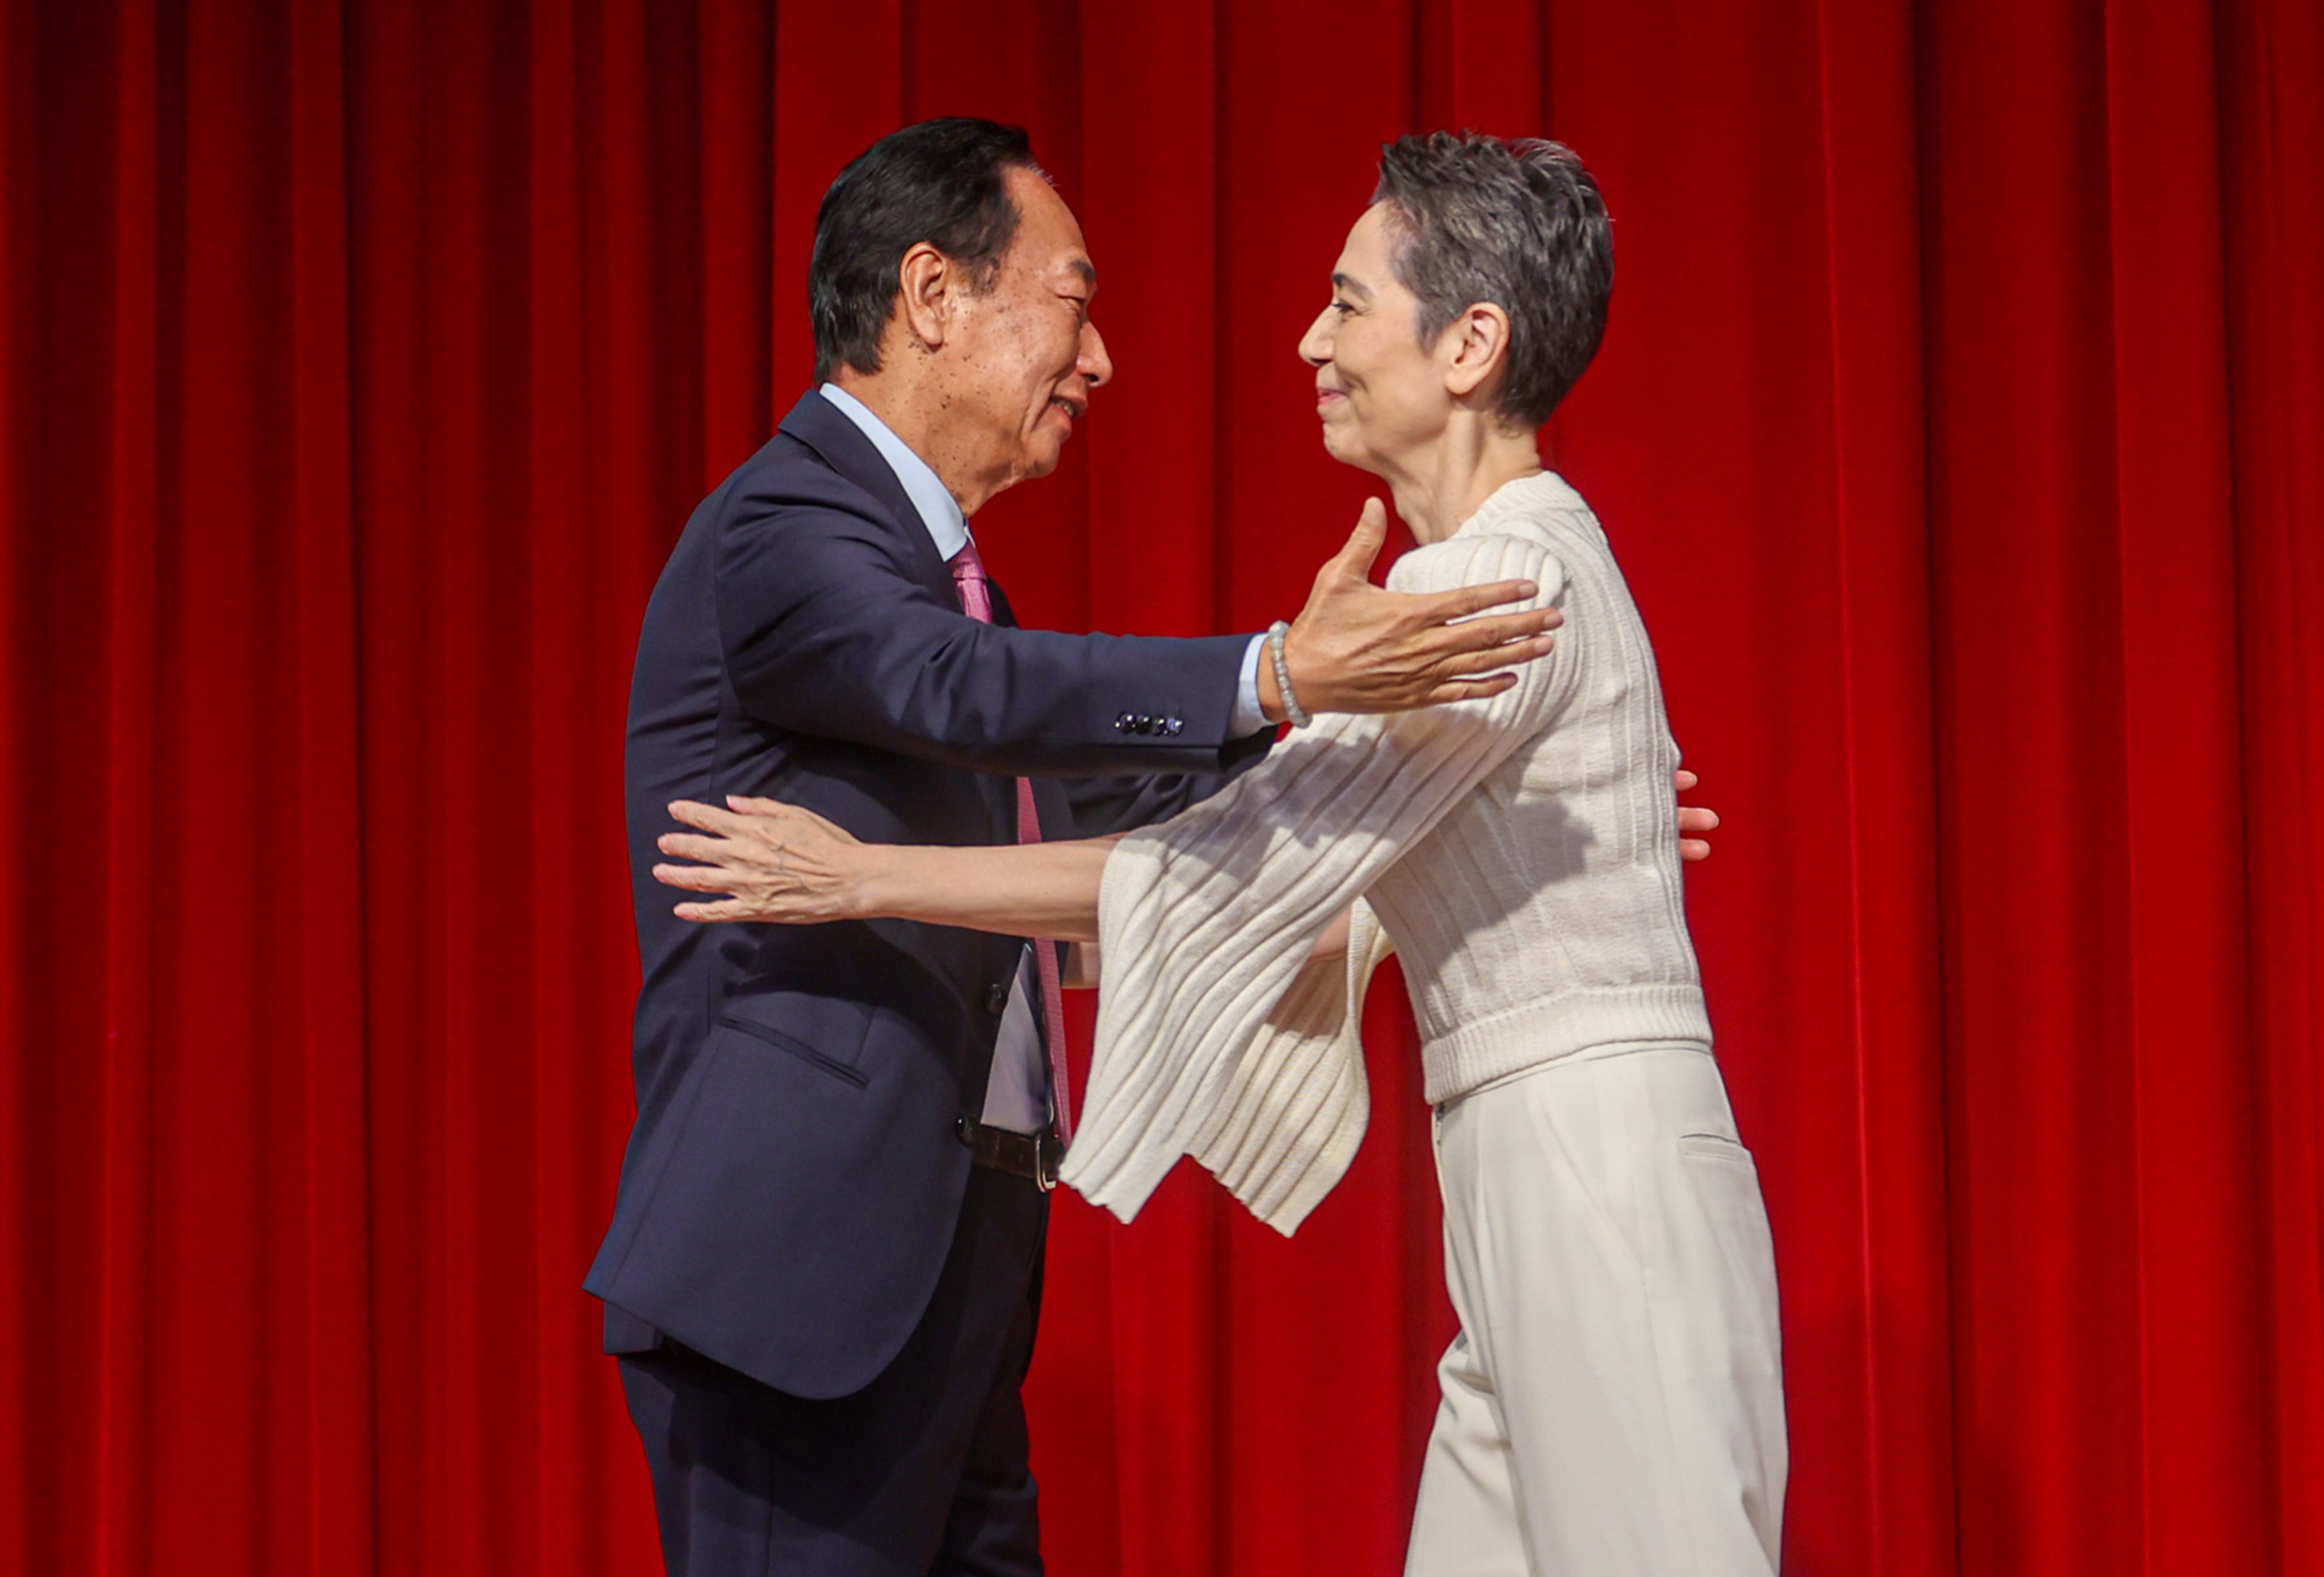 Foxconn founder Terry Gou and running mate Tammy Lai Pei-hsia embrace during a press conference in Taipei on Thursday. The Foxconn founder said Lai was the obvious choice for his independent ticket. Photo: CNA